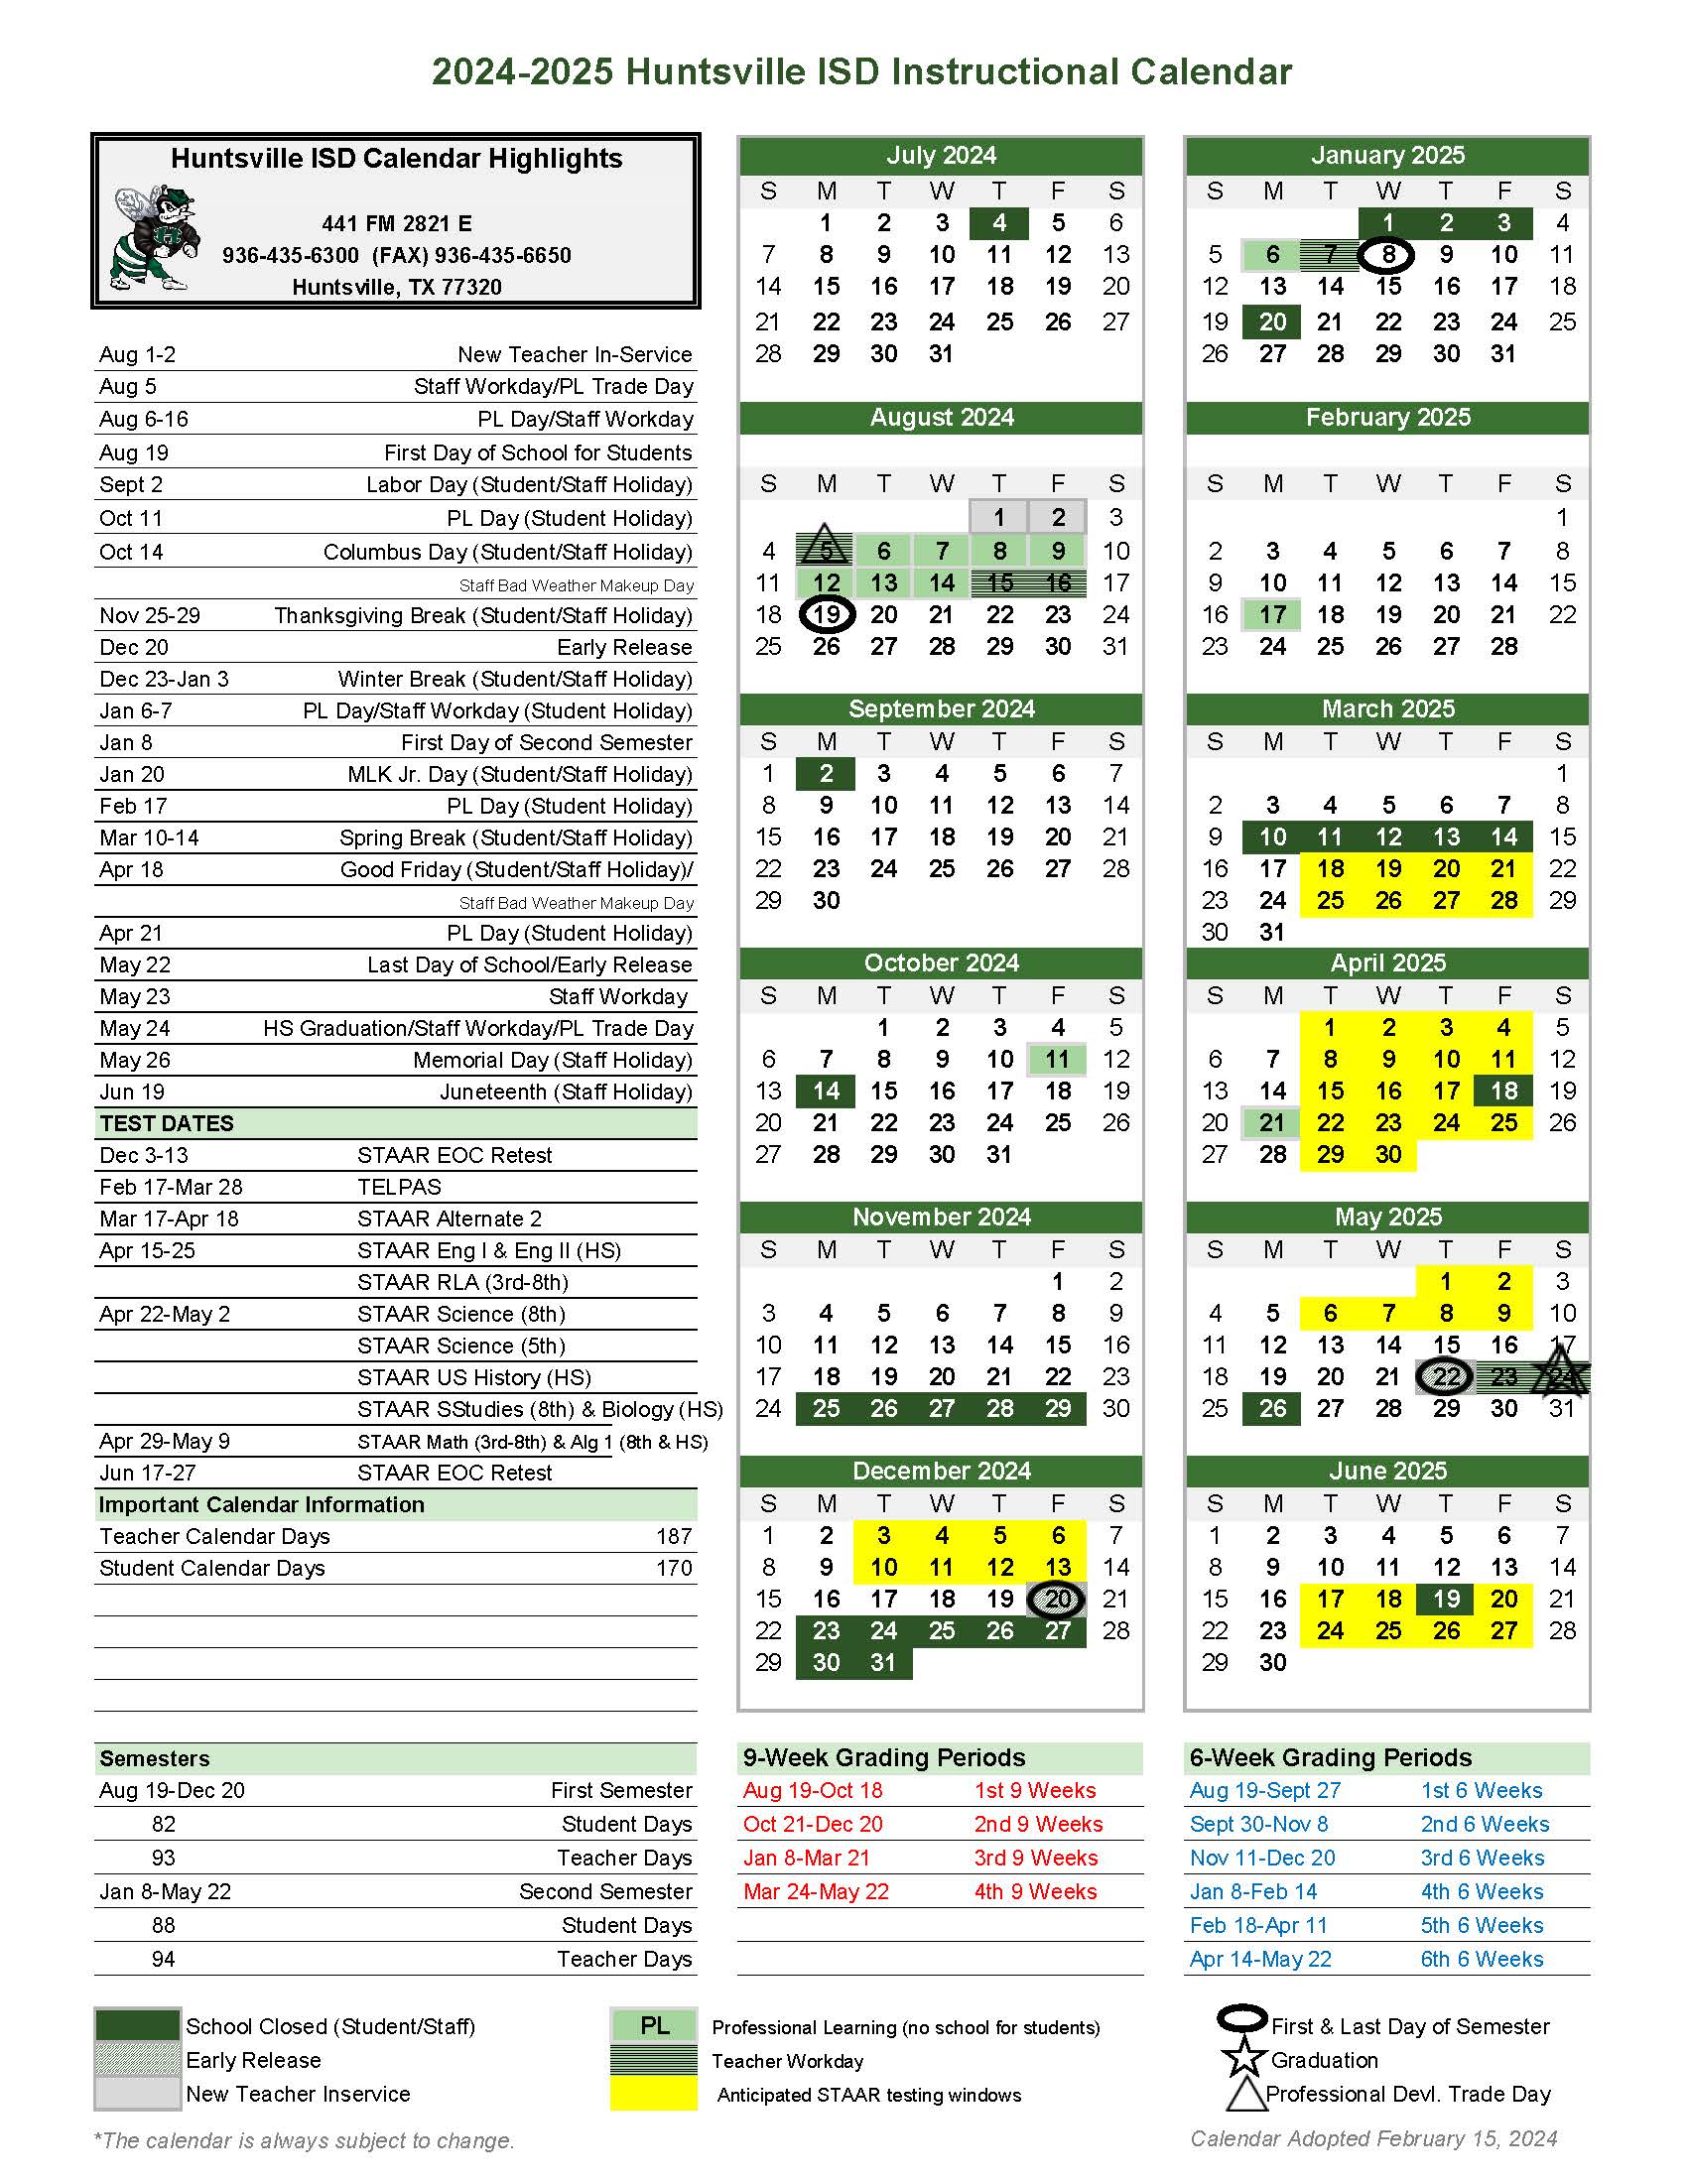 adopted calendar for the 2024-2025 school year